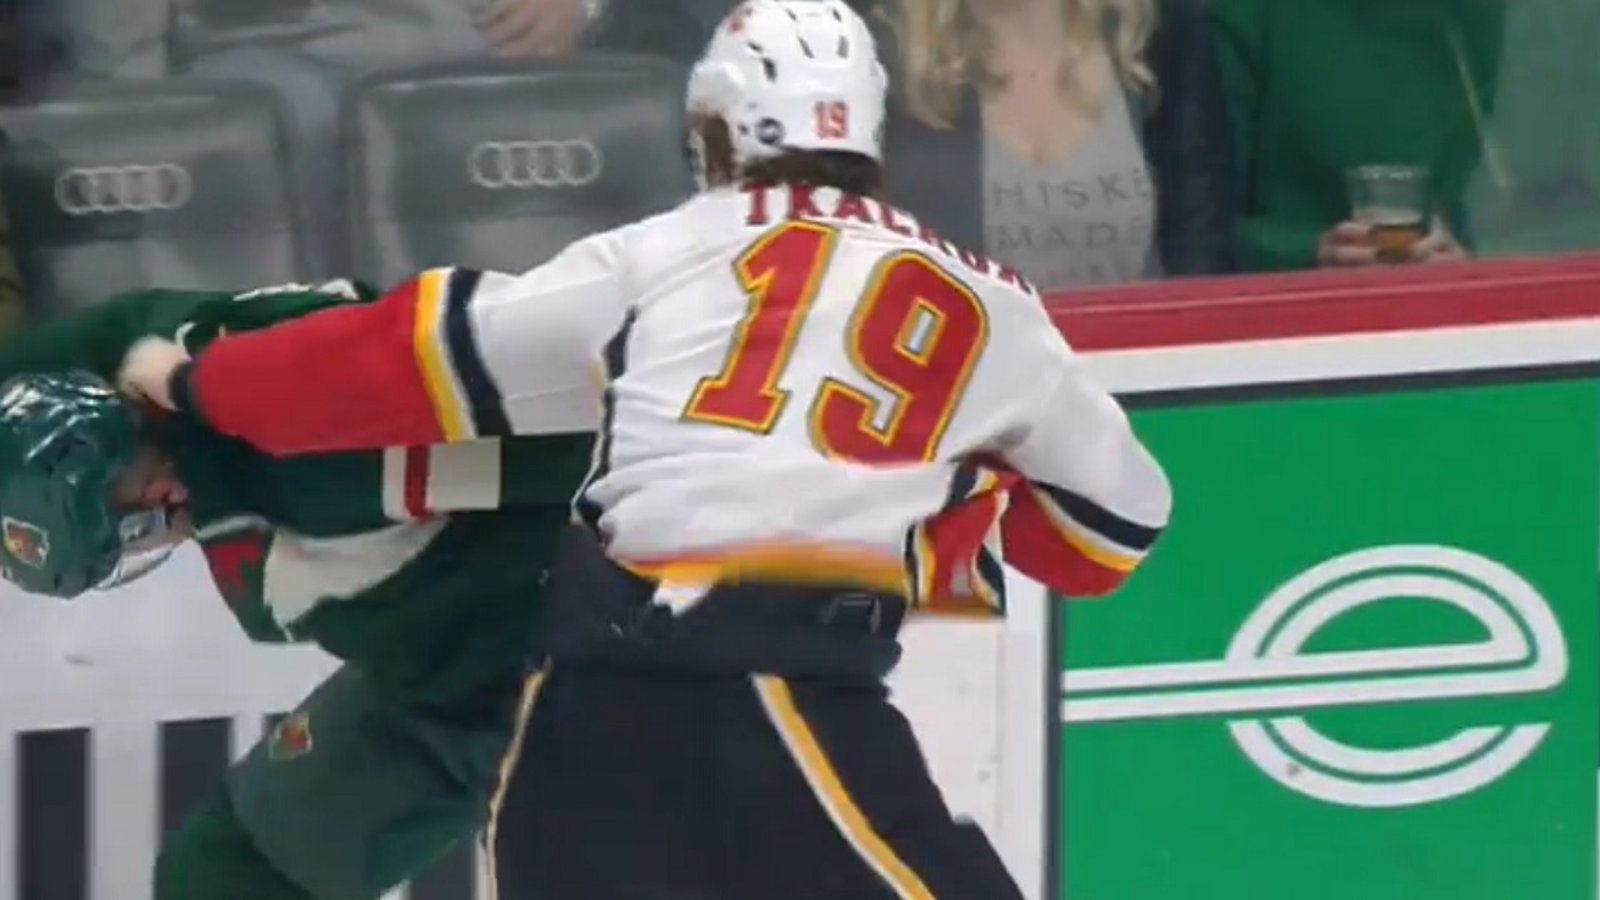 Tkachuk and Dumba drop the gloves just 40 seconds in!